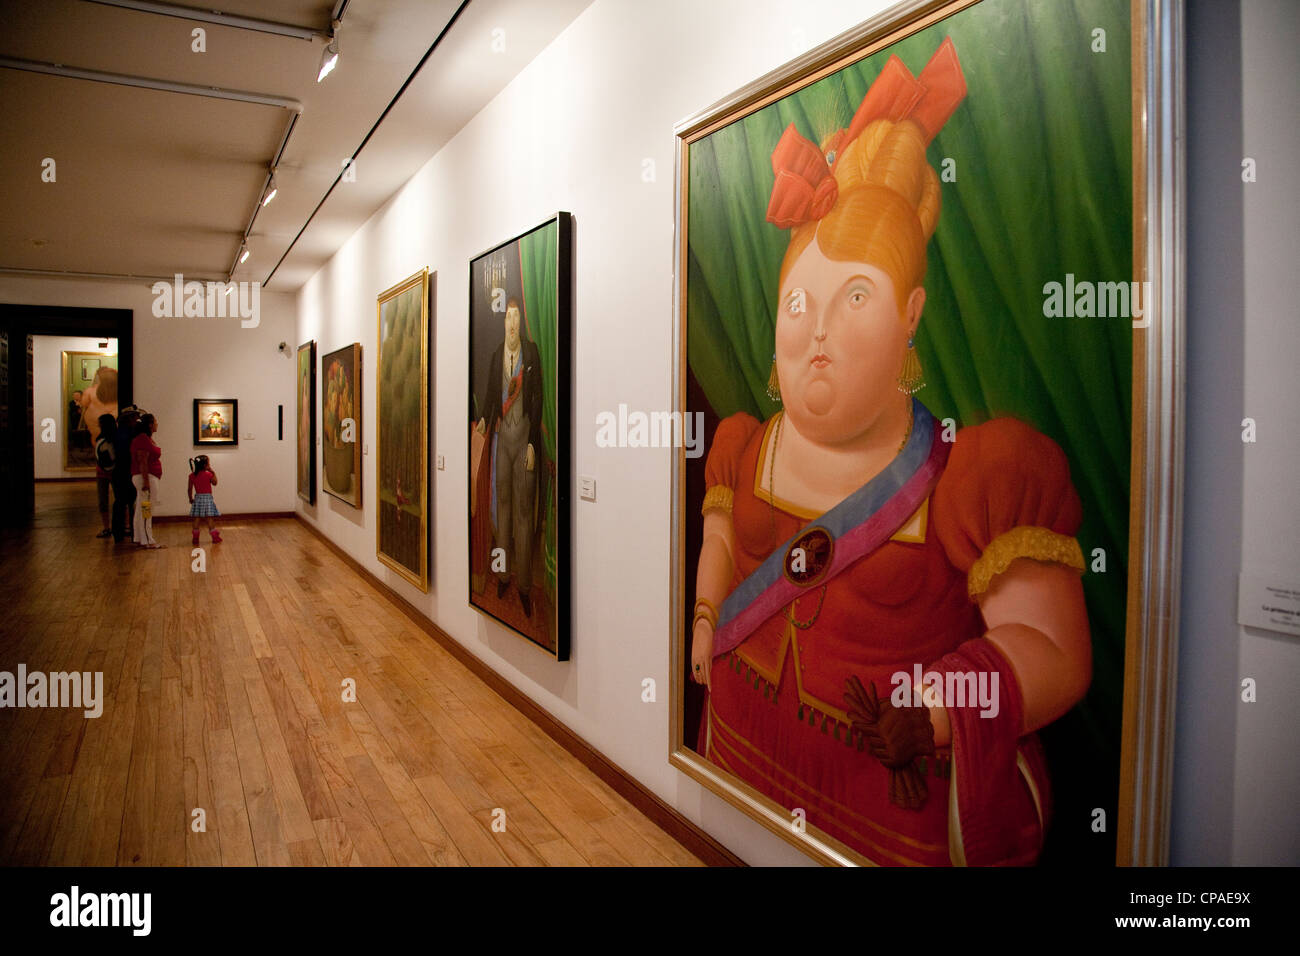 La primera dama, First Lady painting by Botero in a gallery at the Botero Museum also known as Museo Botero, Bogotá, Colombia Stock Photo